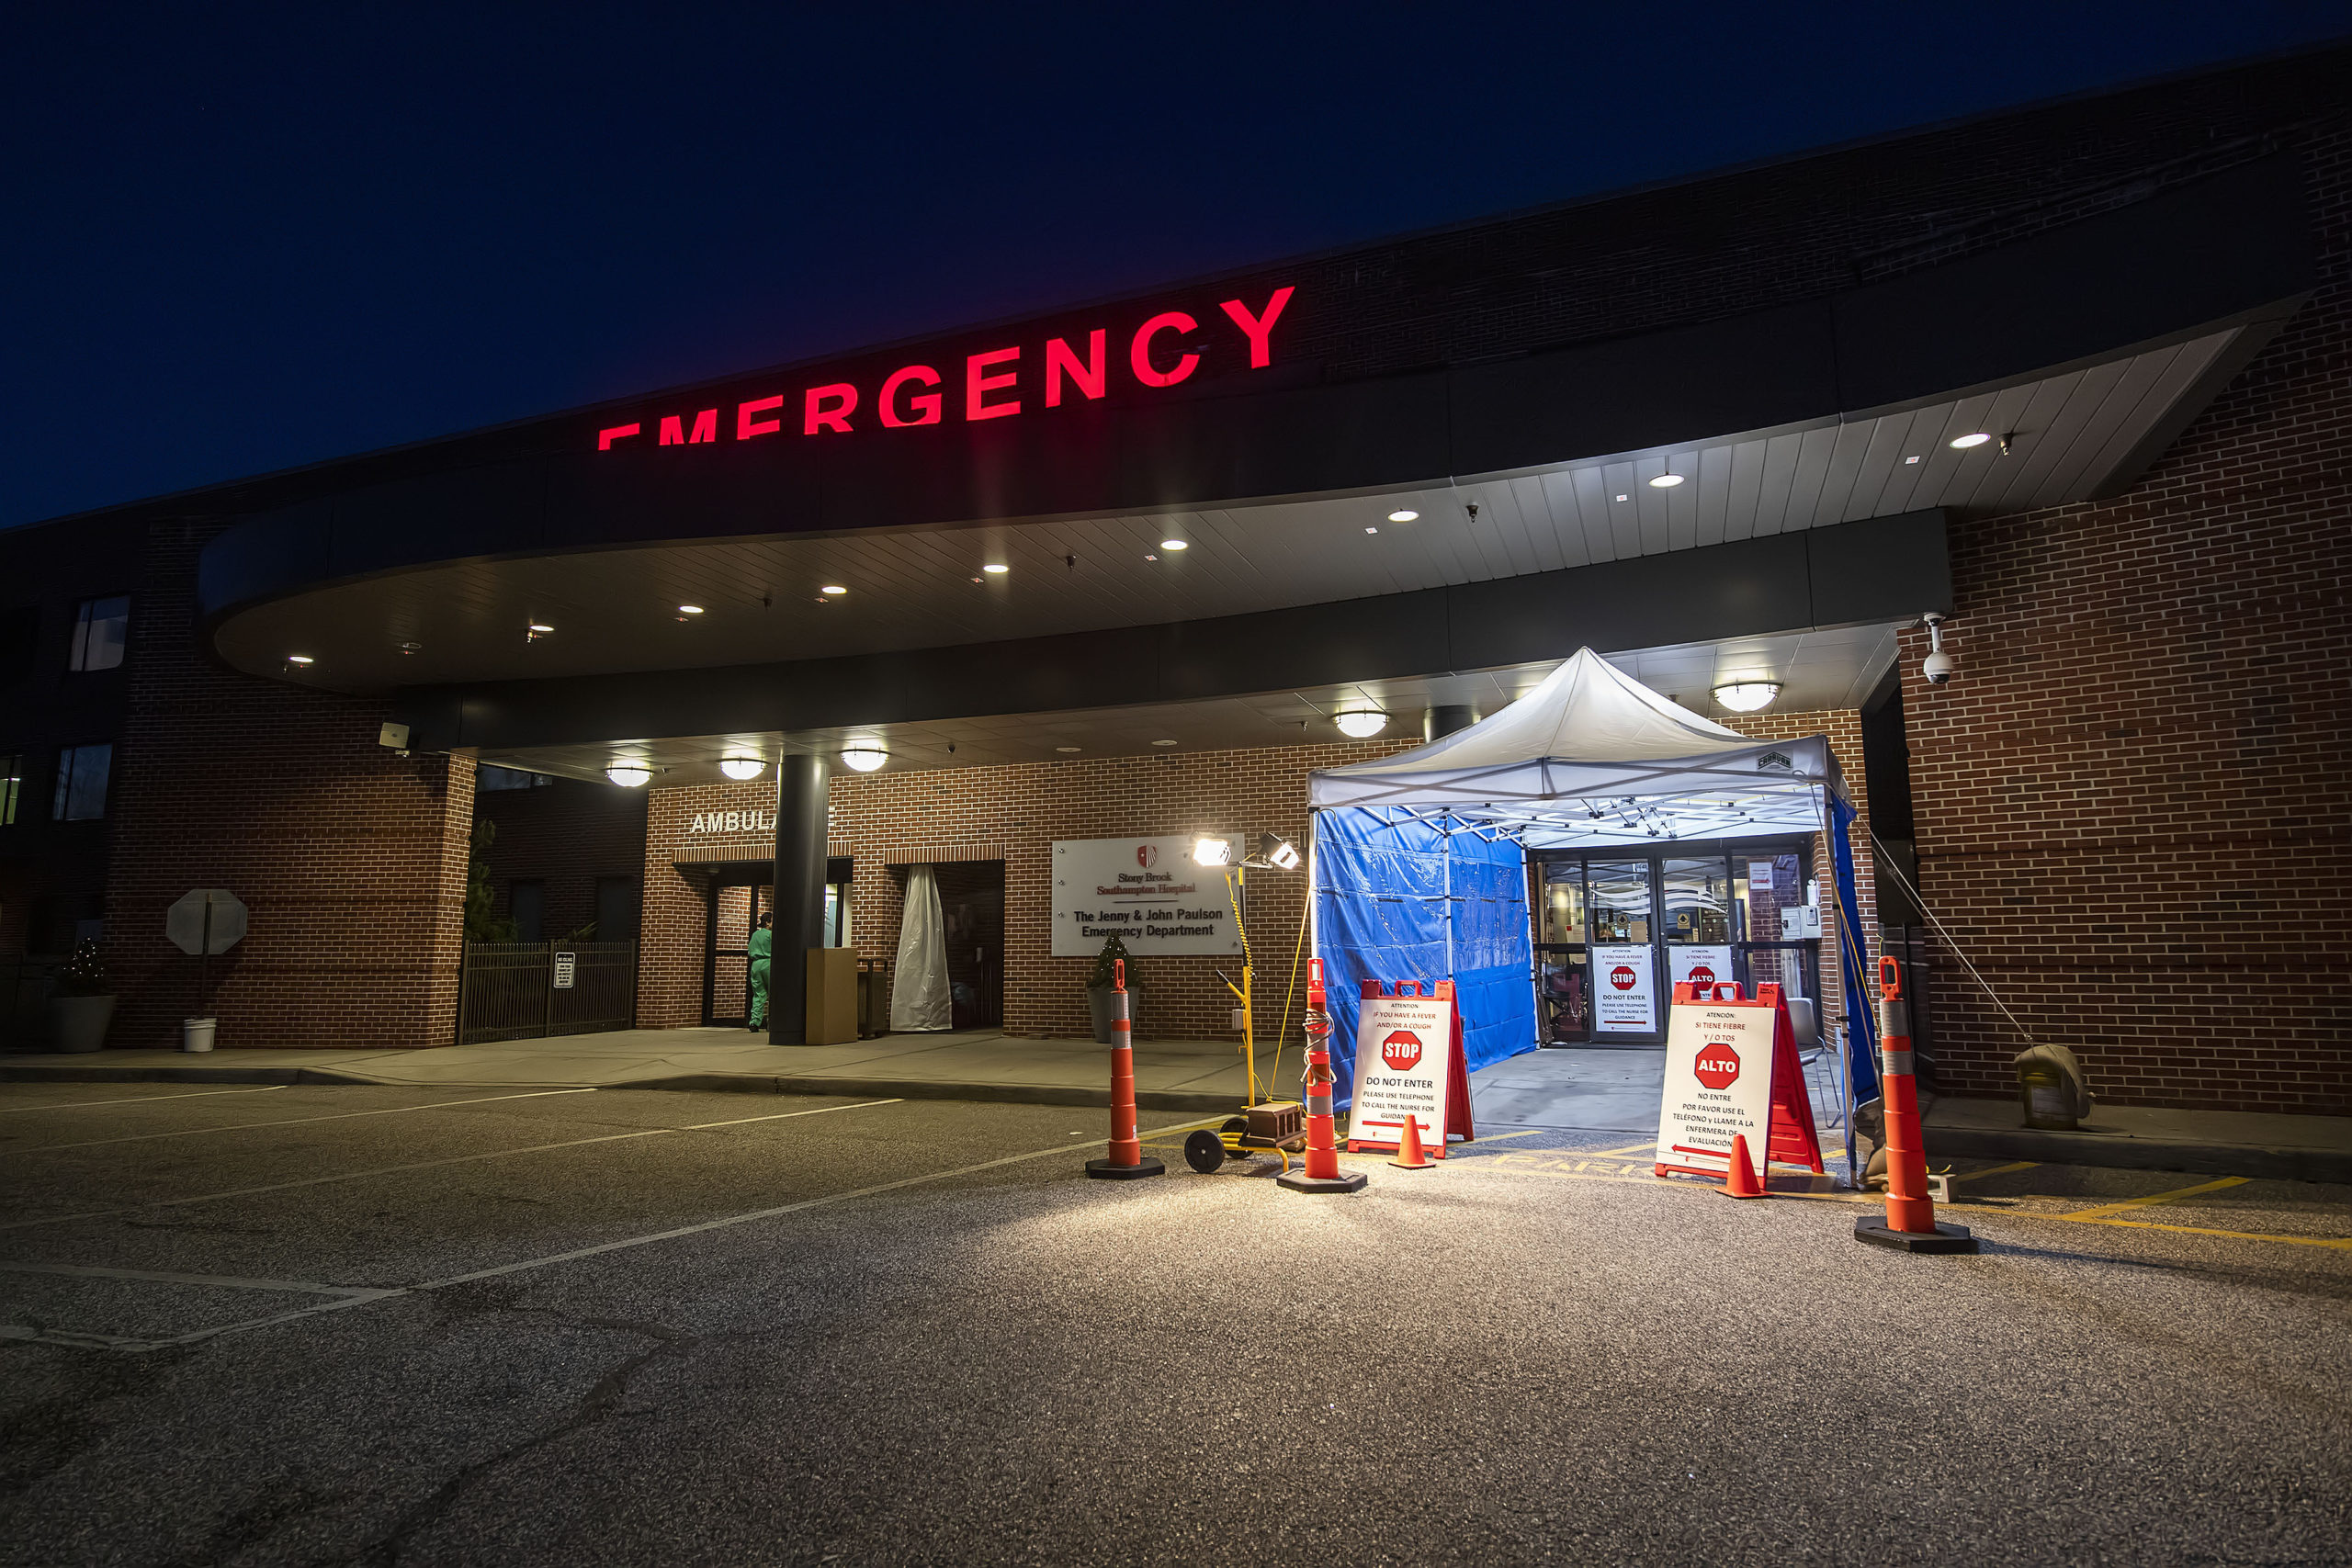 The exterior entrance of the Southampton Hospital Emergency Department as prepared for the COVID-19 pandemic, photographed on Friday night.  MICHAEL HELLER